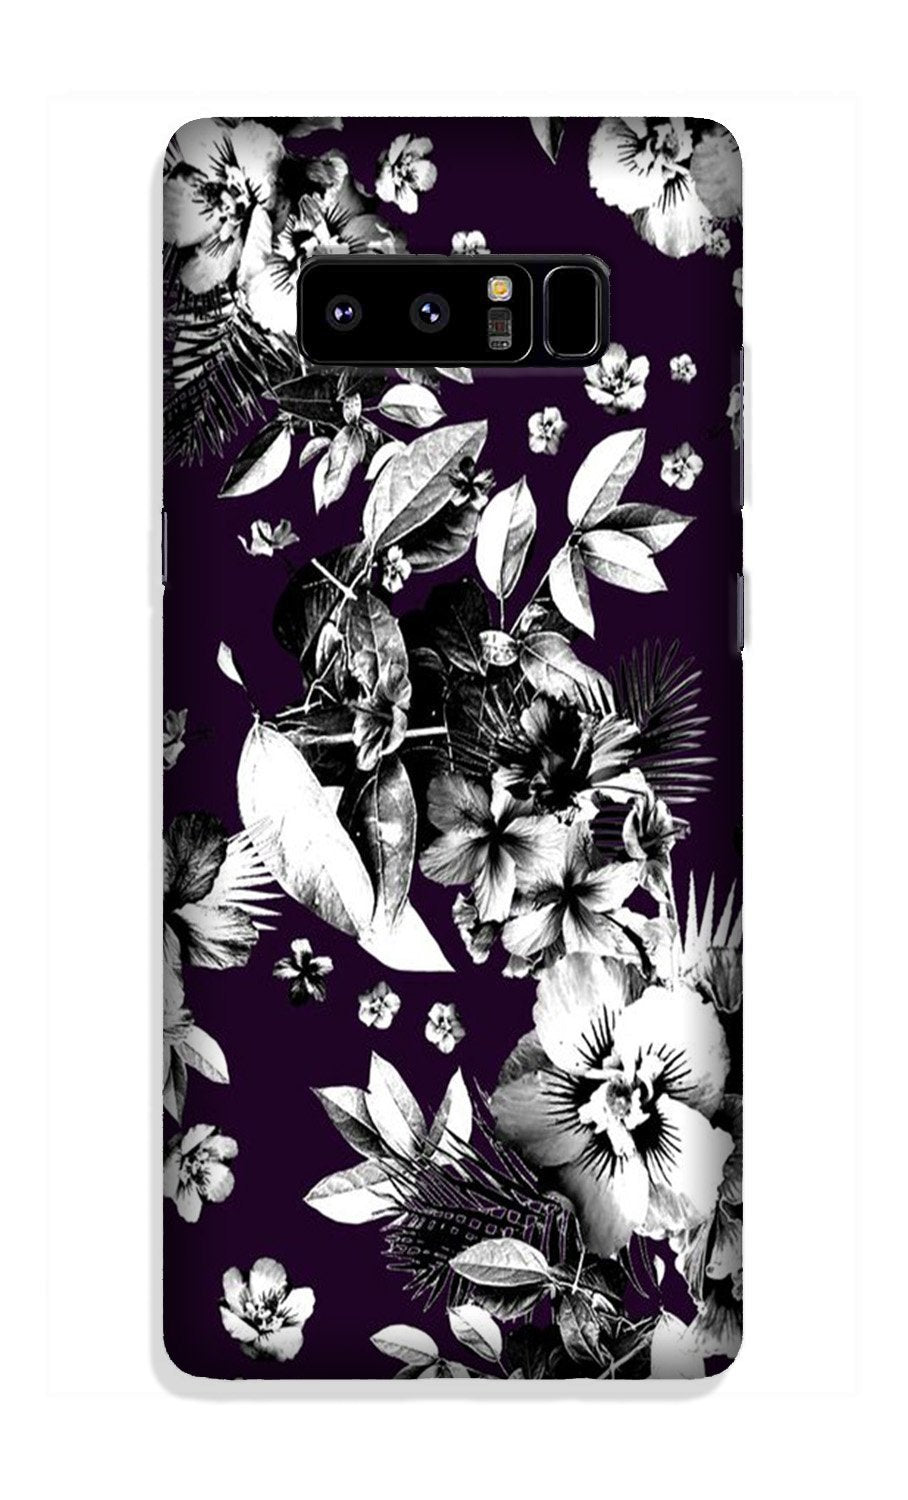 white flowers Case for Galaxy Note 8